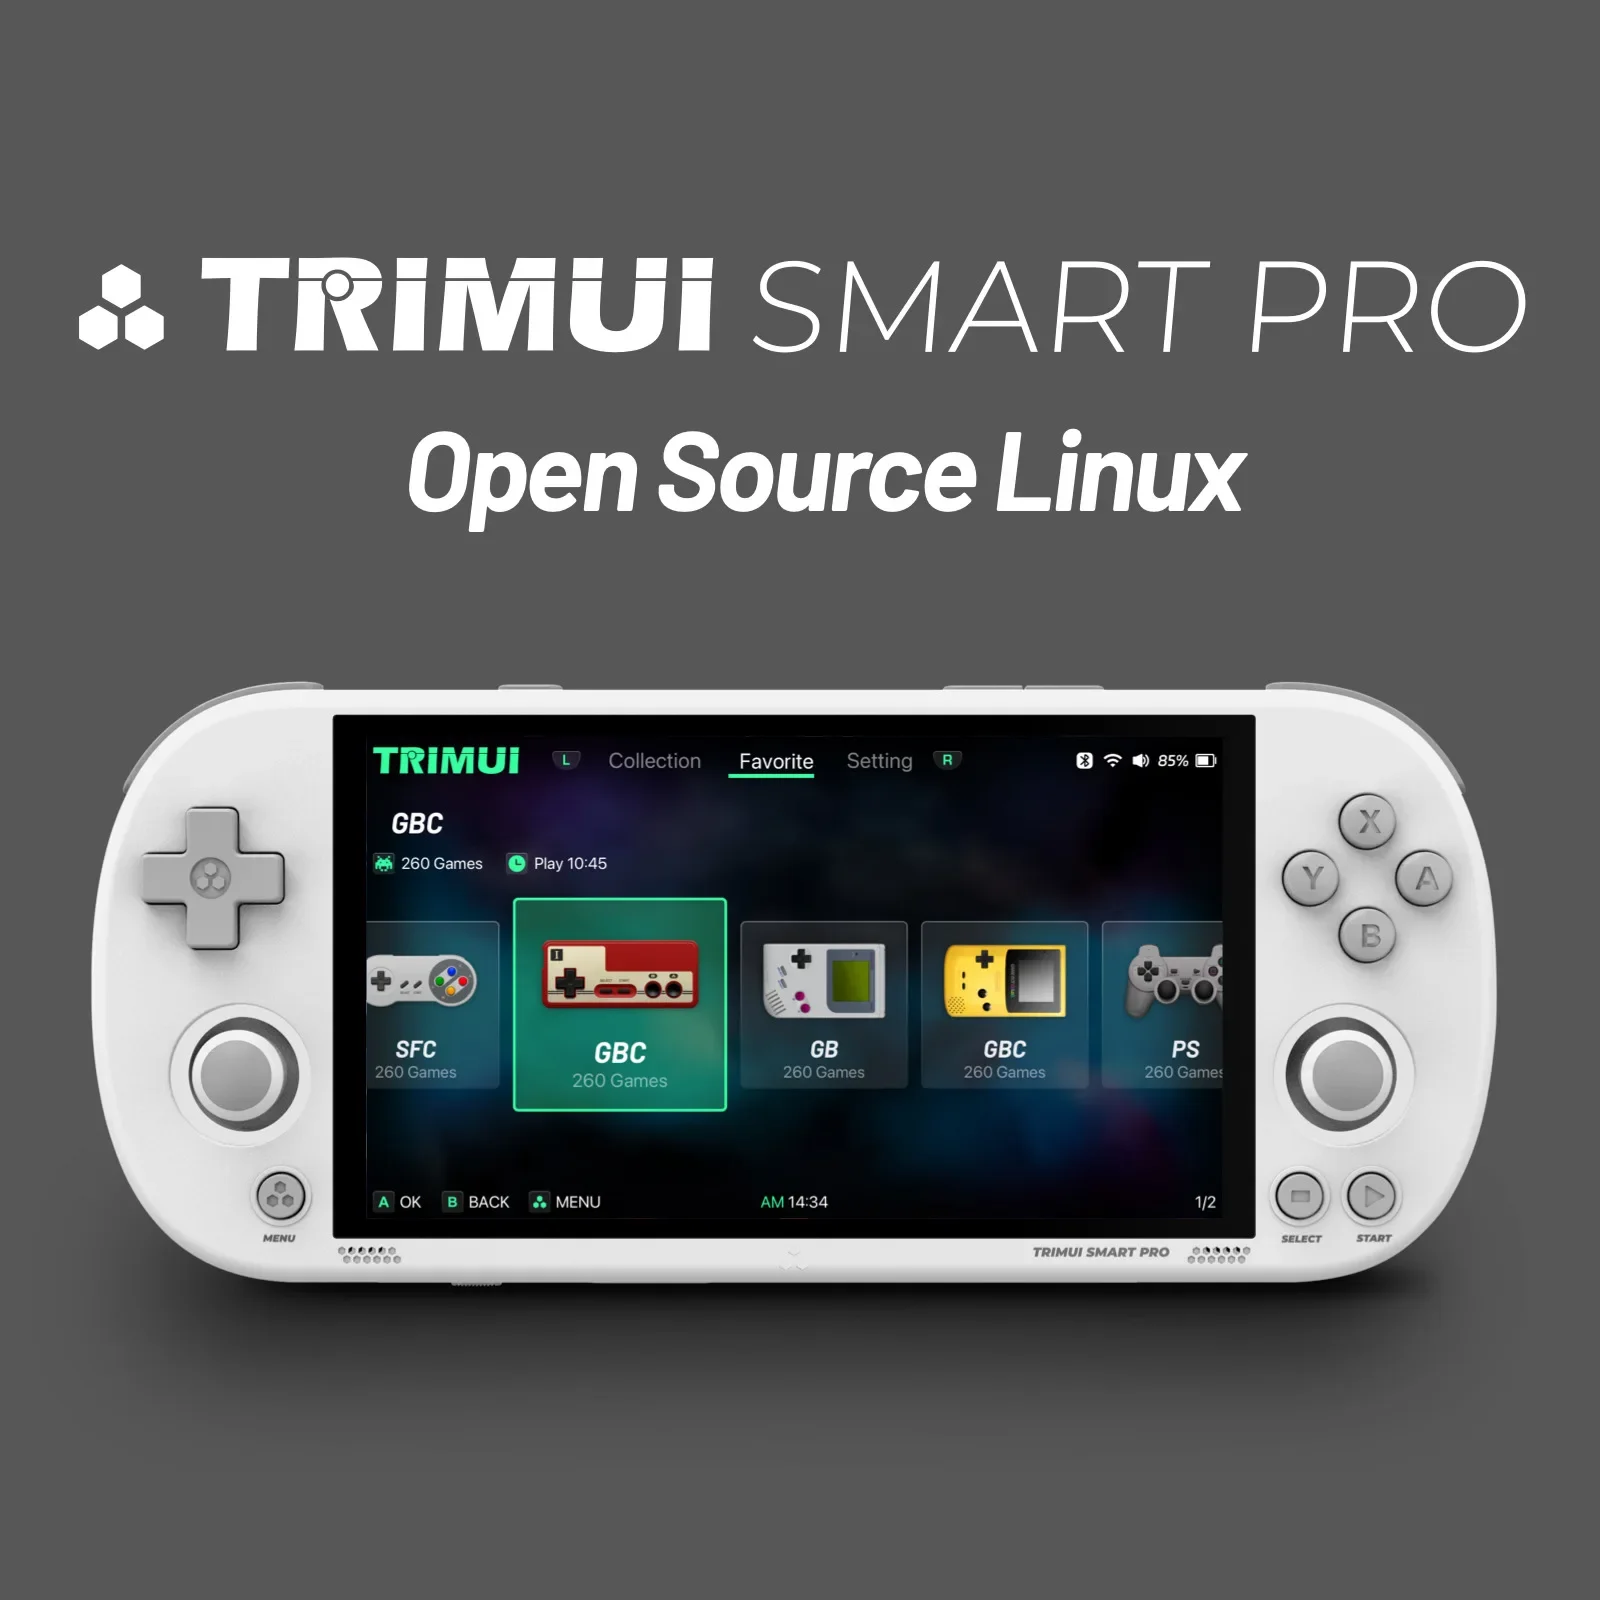 

Trimui Smart Pro PSP 4.96 Inches Handheld Games Portable Retro Arcade 256g Linux Open Source Games Console Kid For Birthday Gift